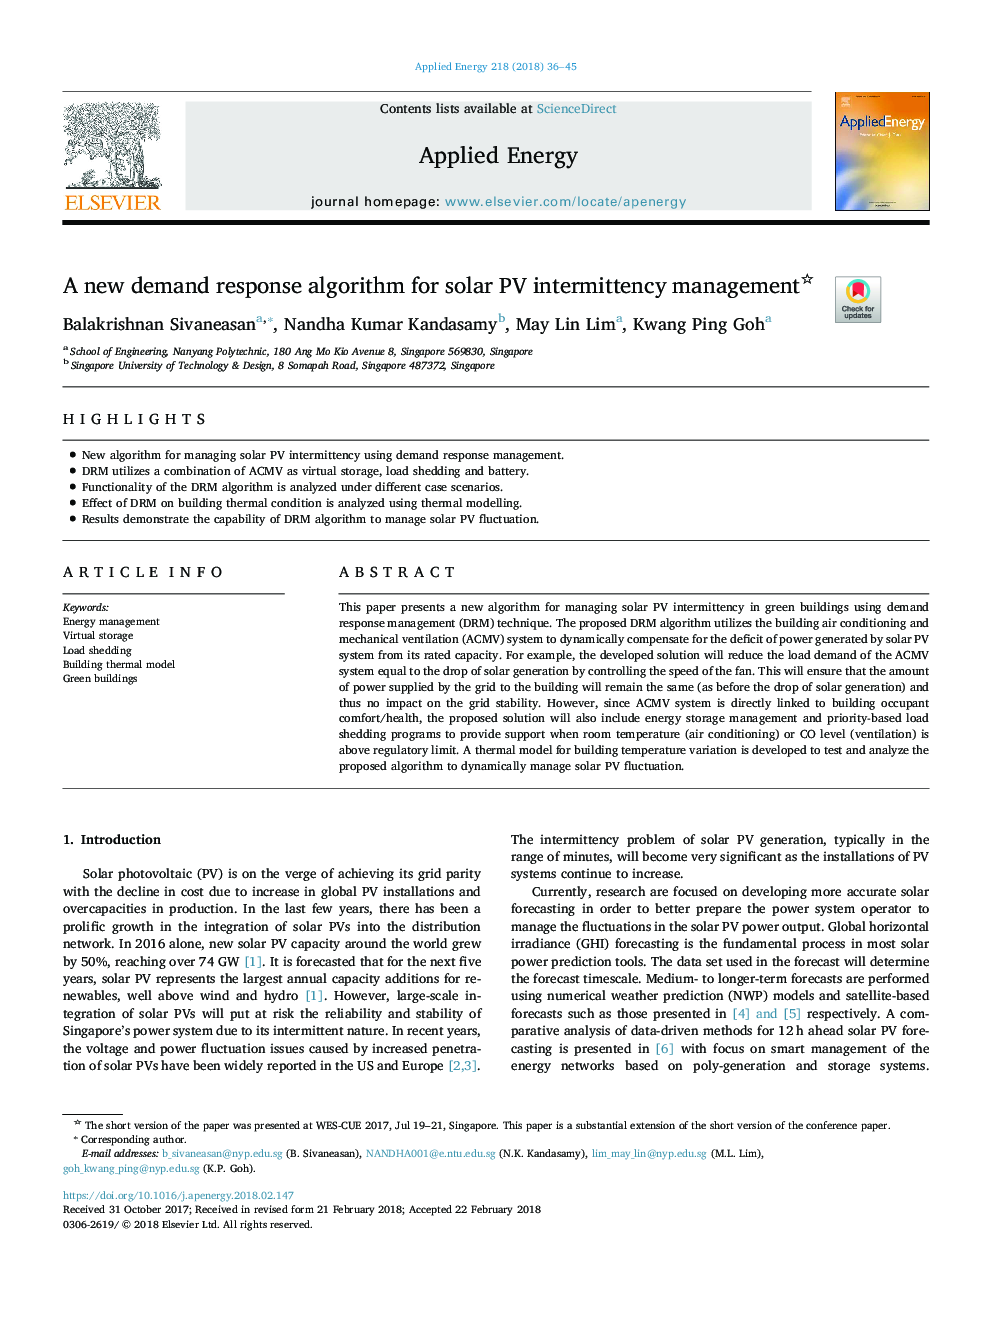 A new demand response algorithm for solar PV intermittency management